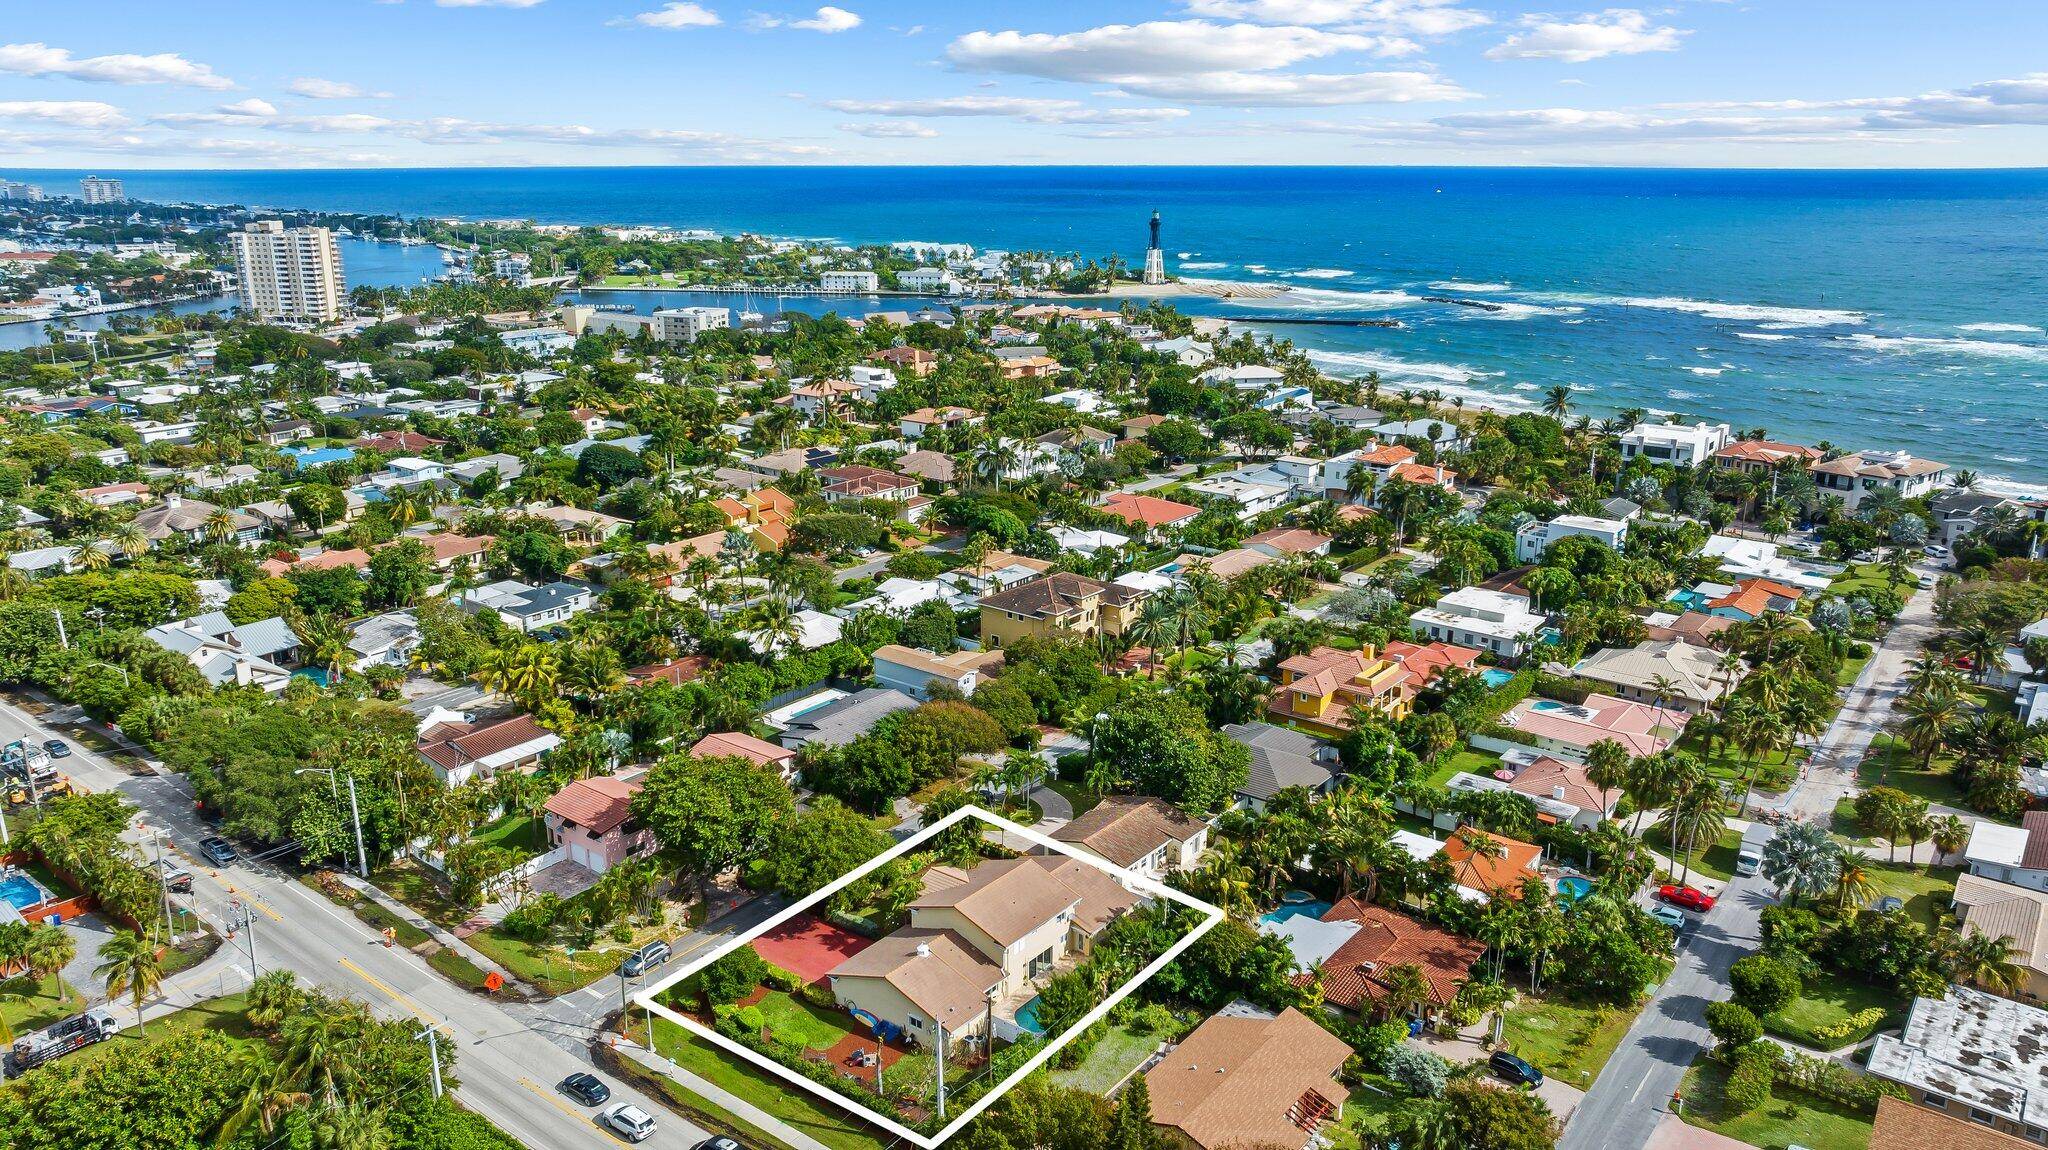 Motivated Seller on this spacious and bright 6 bedroom, 5 bath home in the exclusive Hillsboro Shores neighborhood of Pompano Beach.